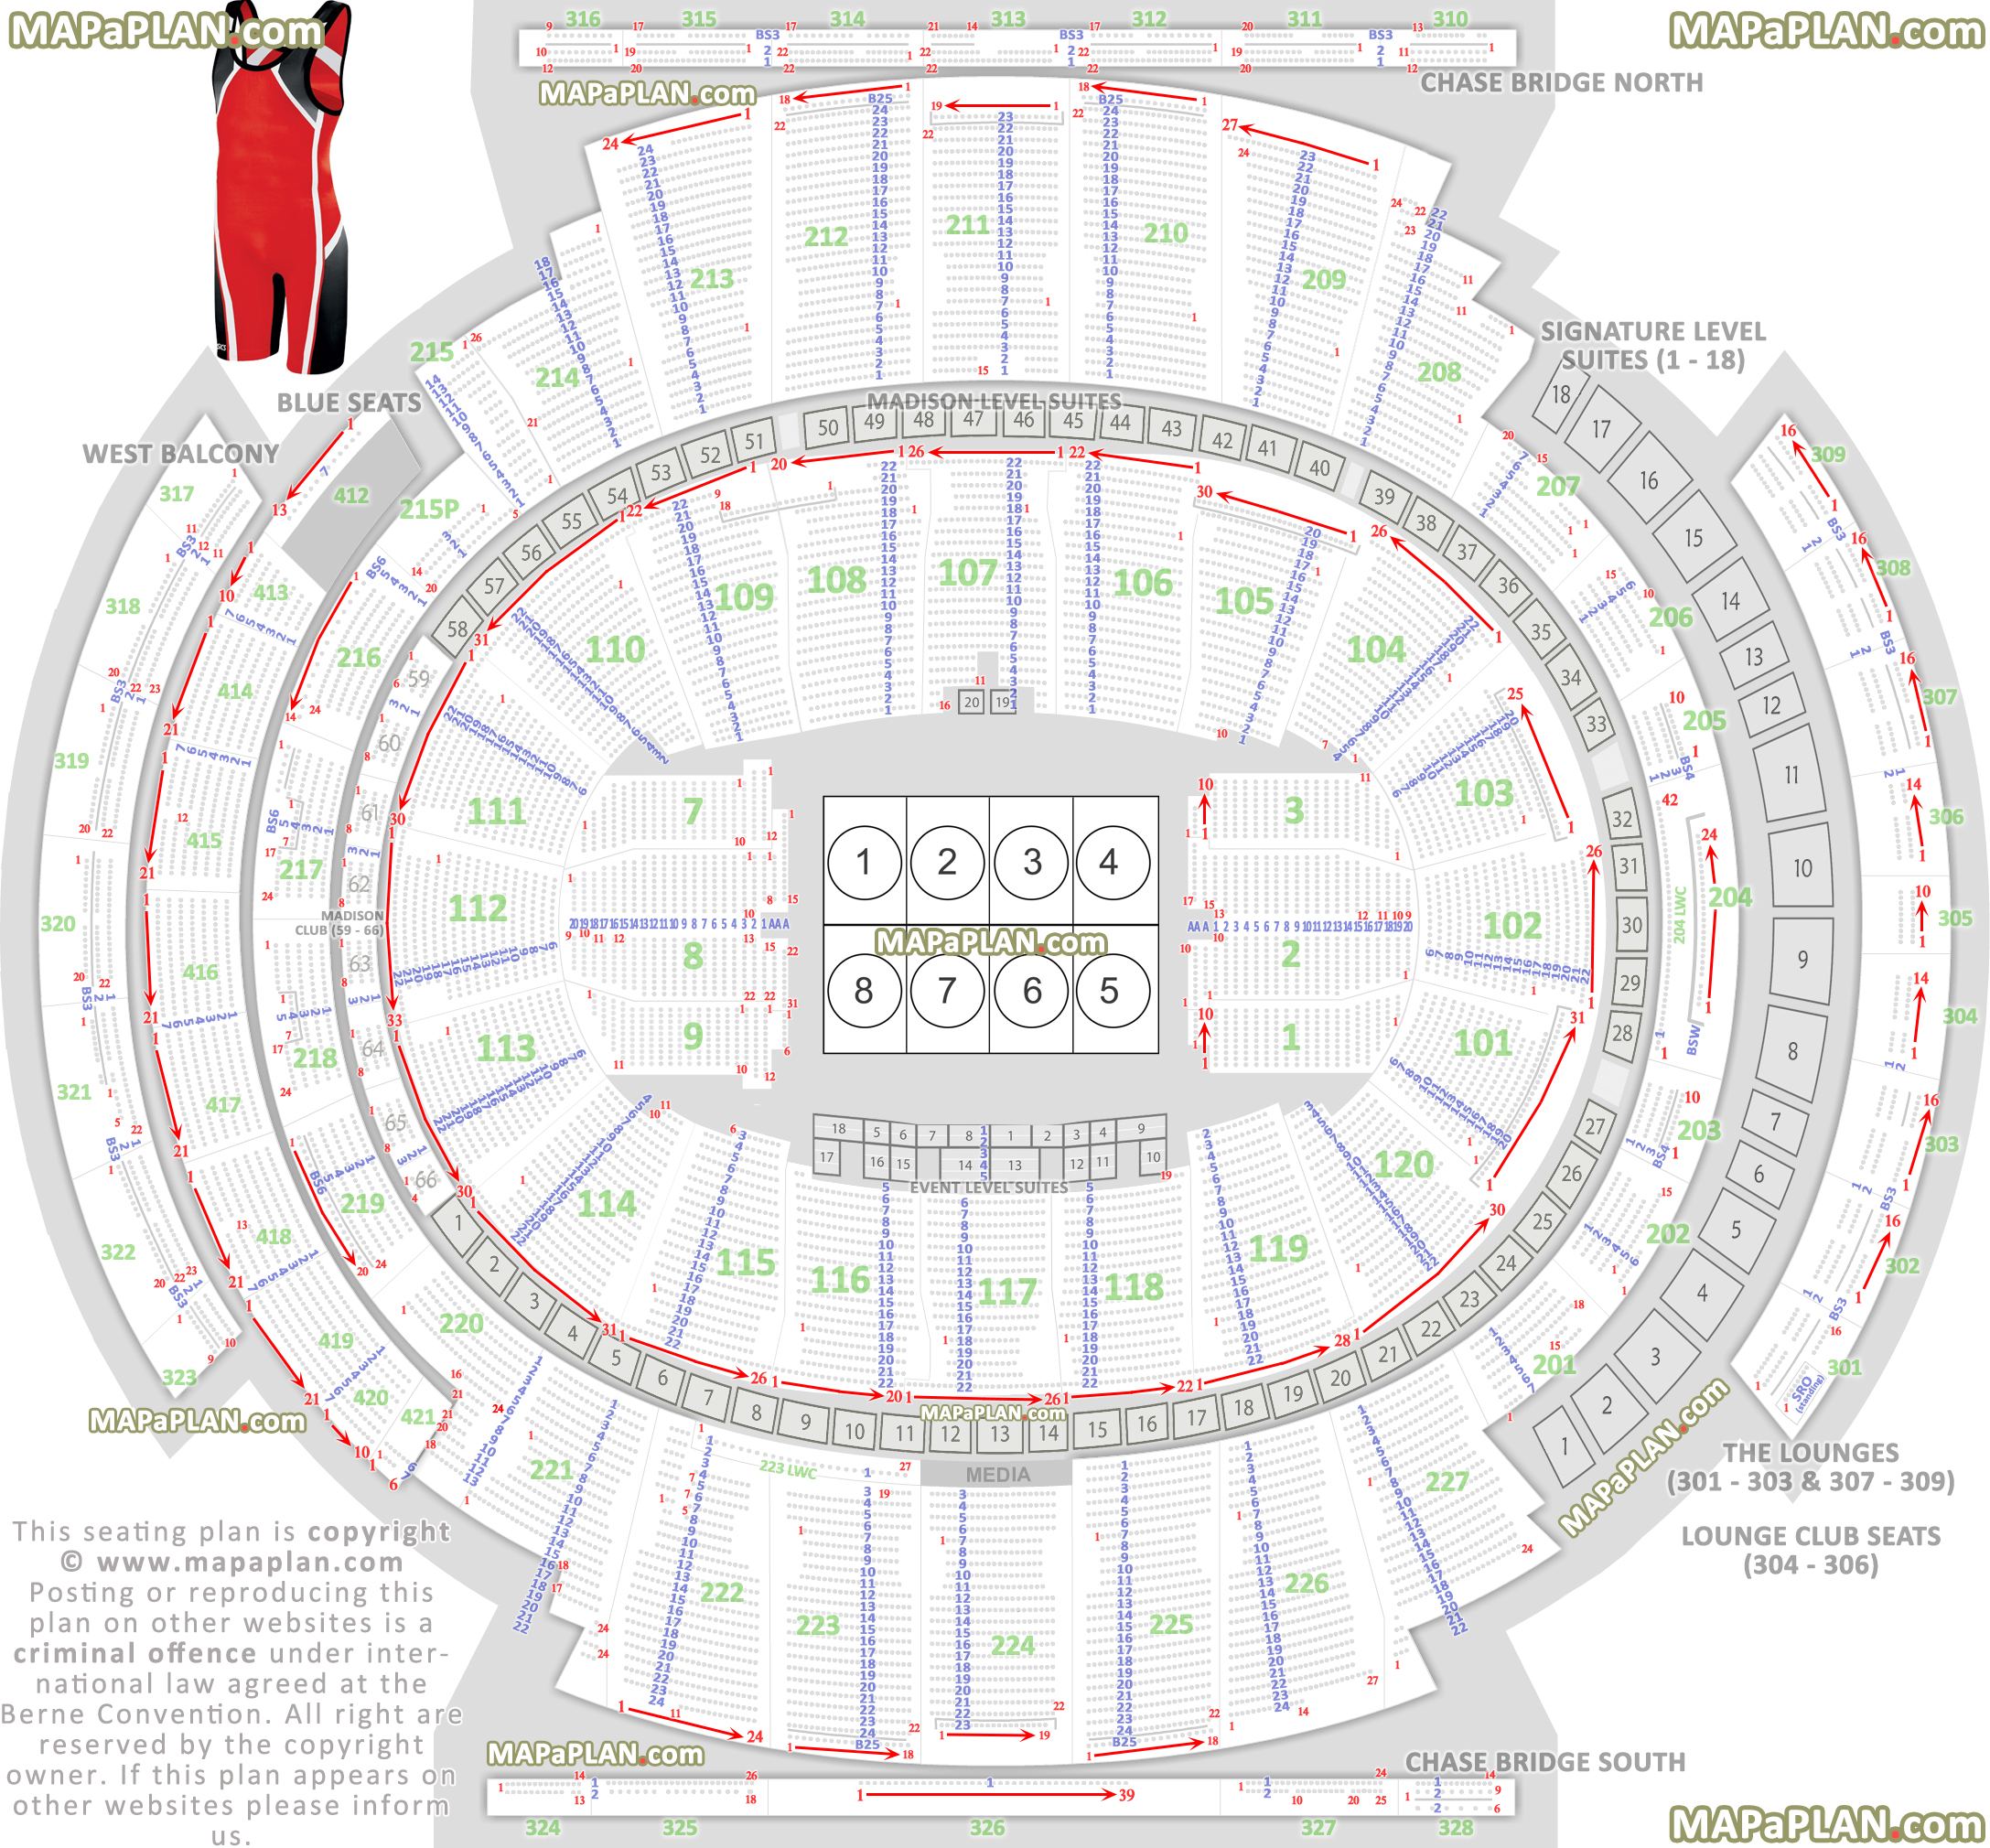 Madison square garden seating chart College wrestling events layout